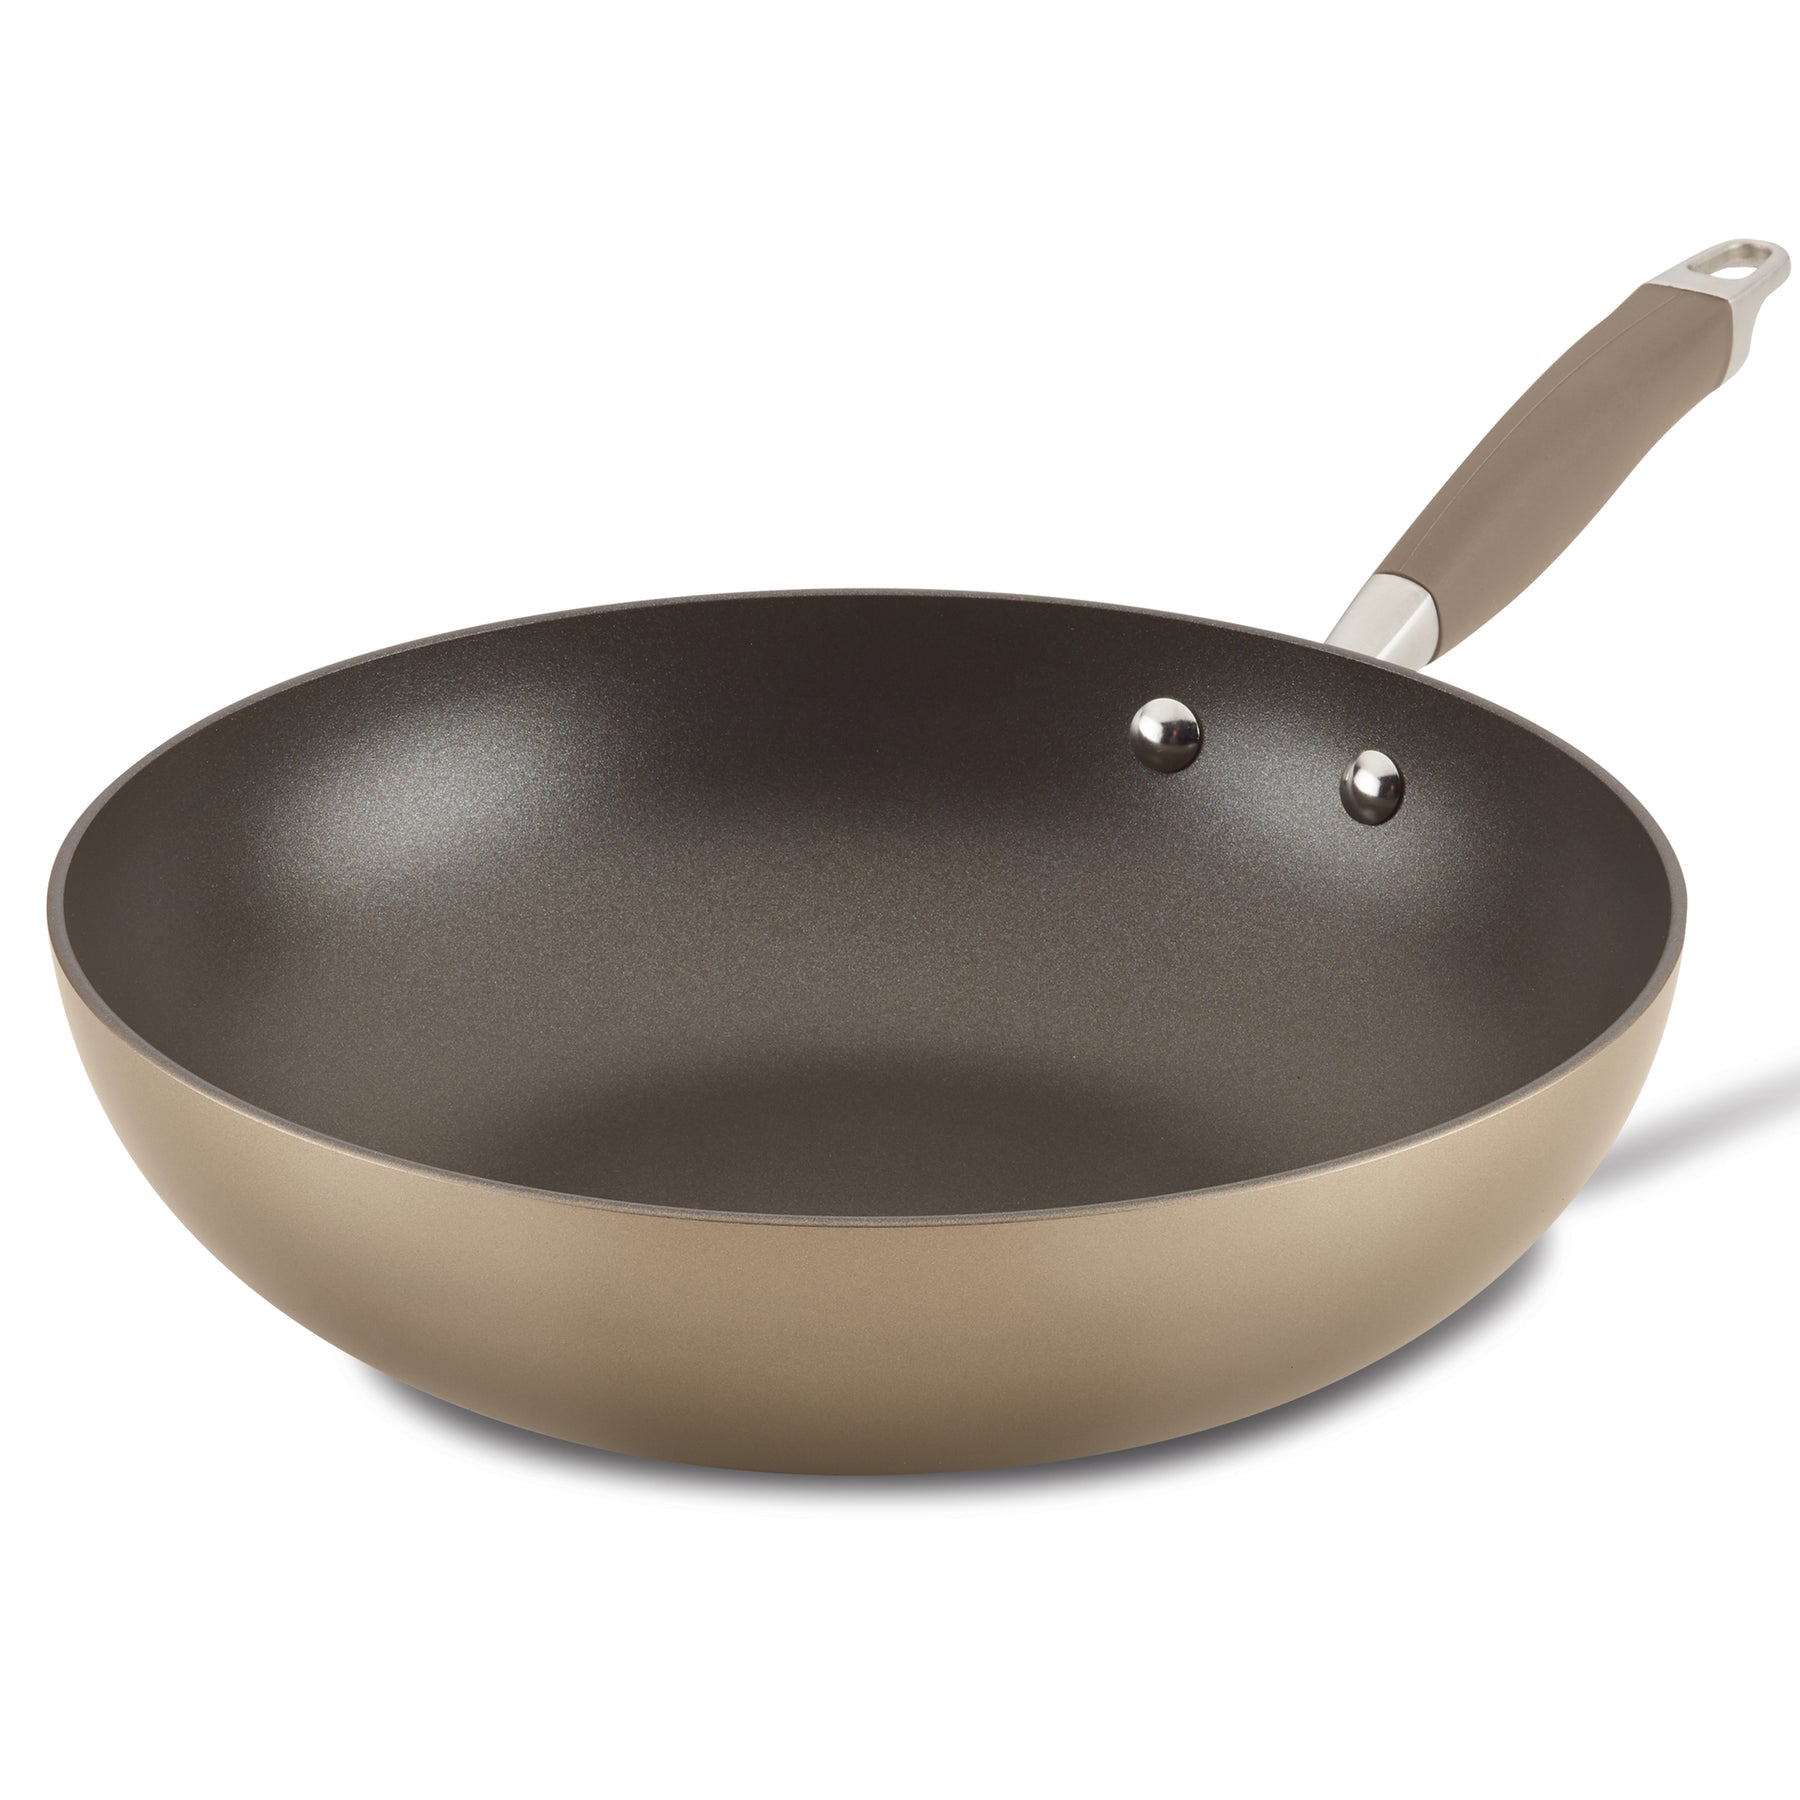 ALVA Forest Non Stick Wok Pan 12.2, Pre-Seasoned Carbon Steel Pan with  Wooden Handle, Carbon Steel Wok Nonstick Pan used for Stir Fry and as Deep